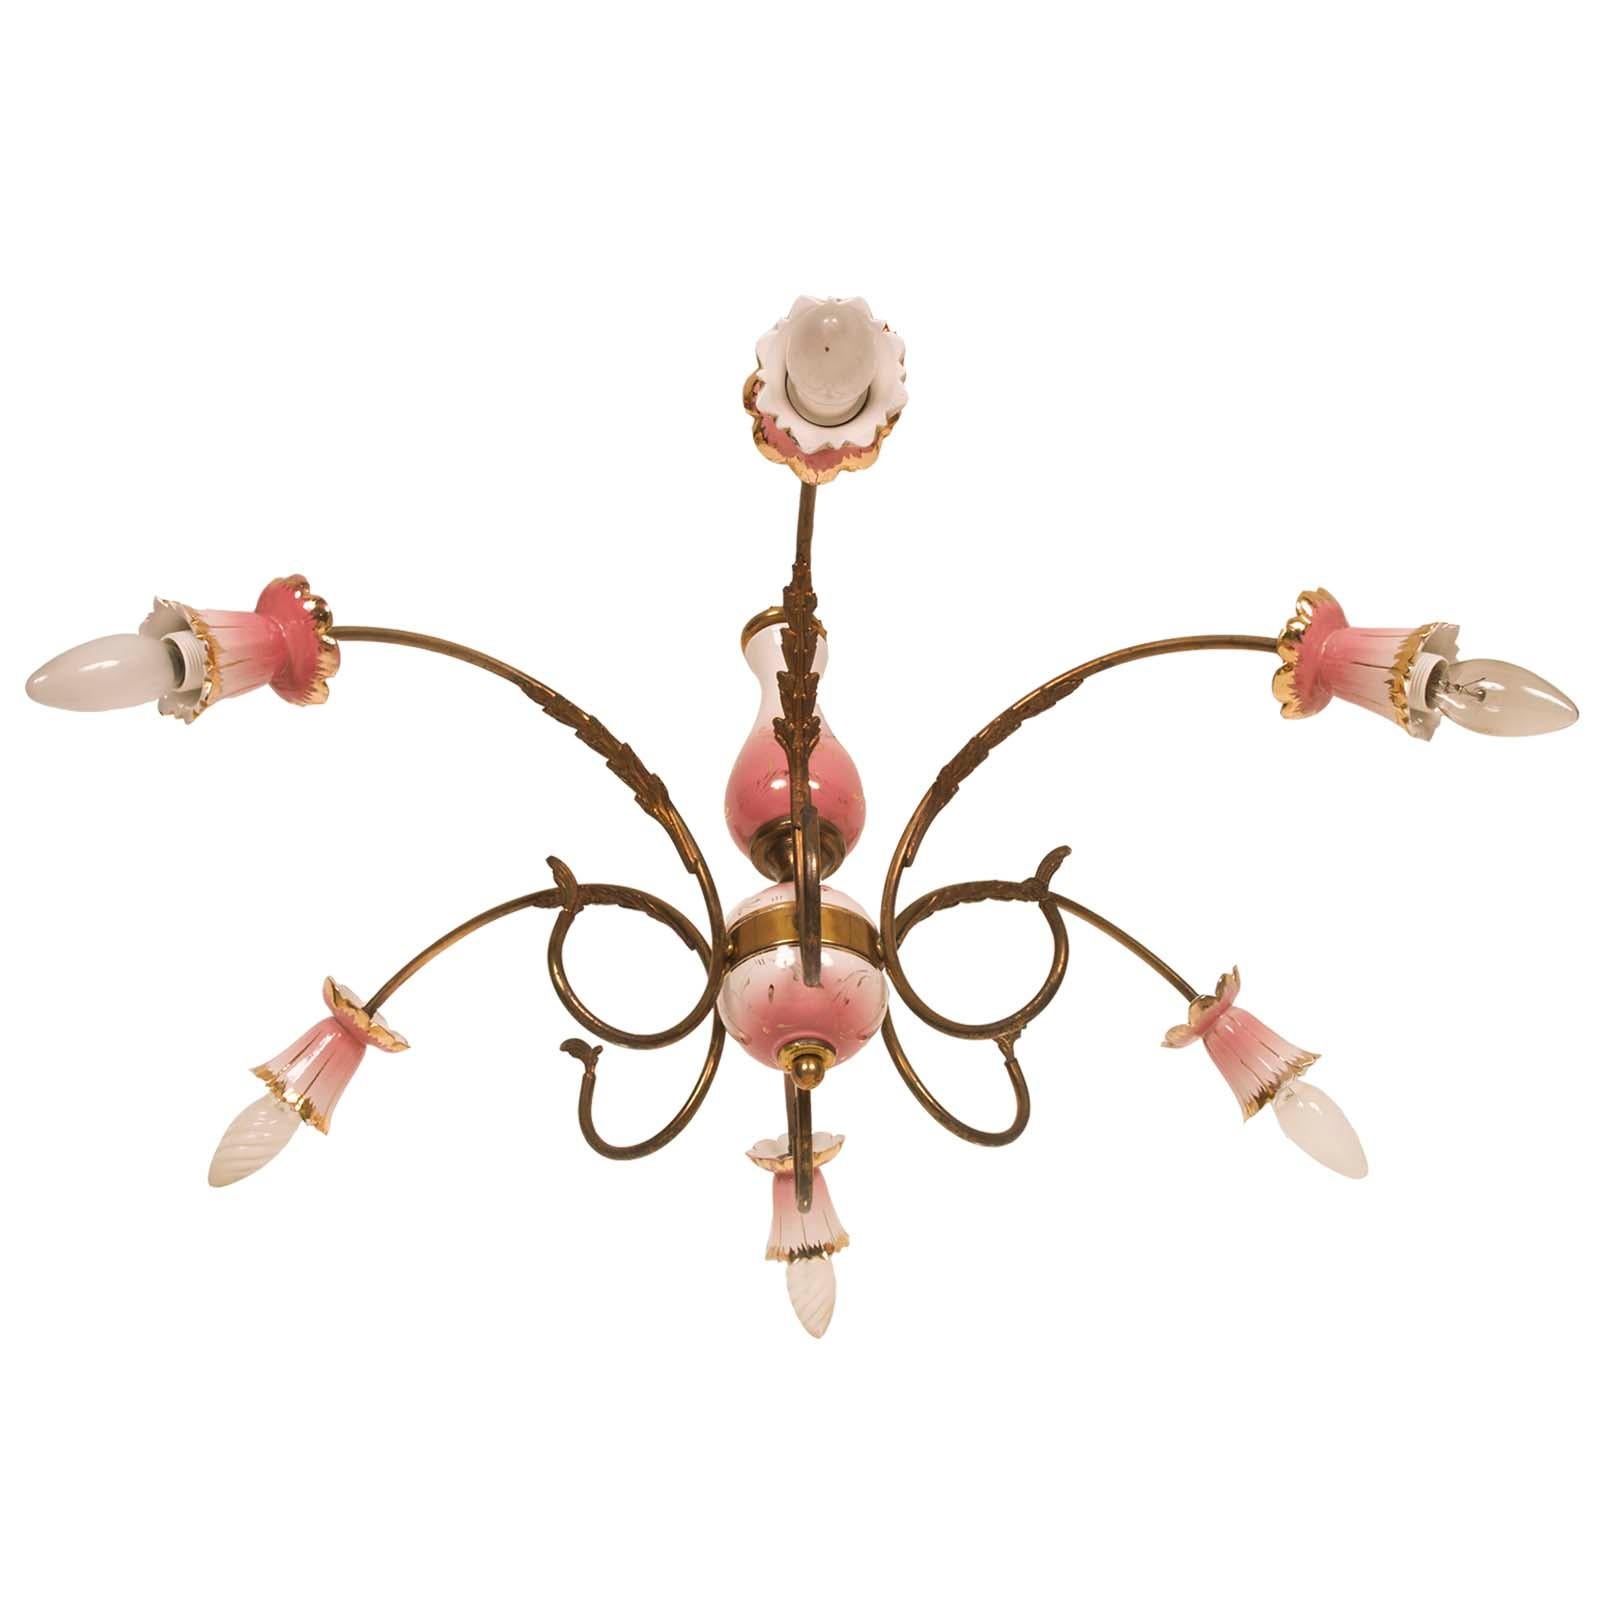 Chandelier Pendant lamp Art Deco, six arms, in gilt brass and decorated glazed ceramic, gold by Richard Ginori Florence
The chandelier has been restored and functioning ready for use.